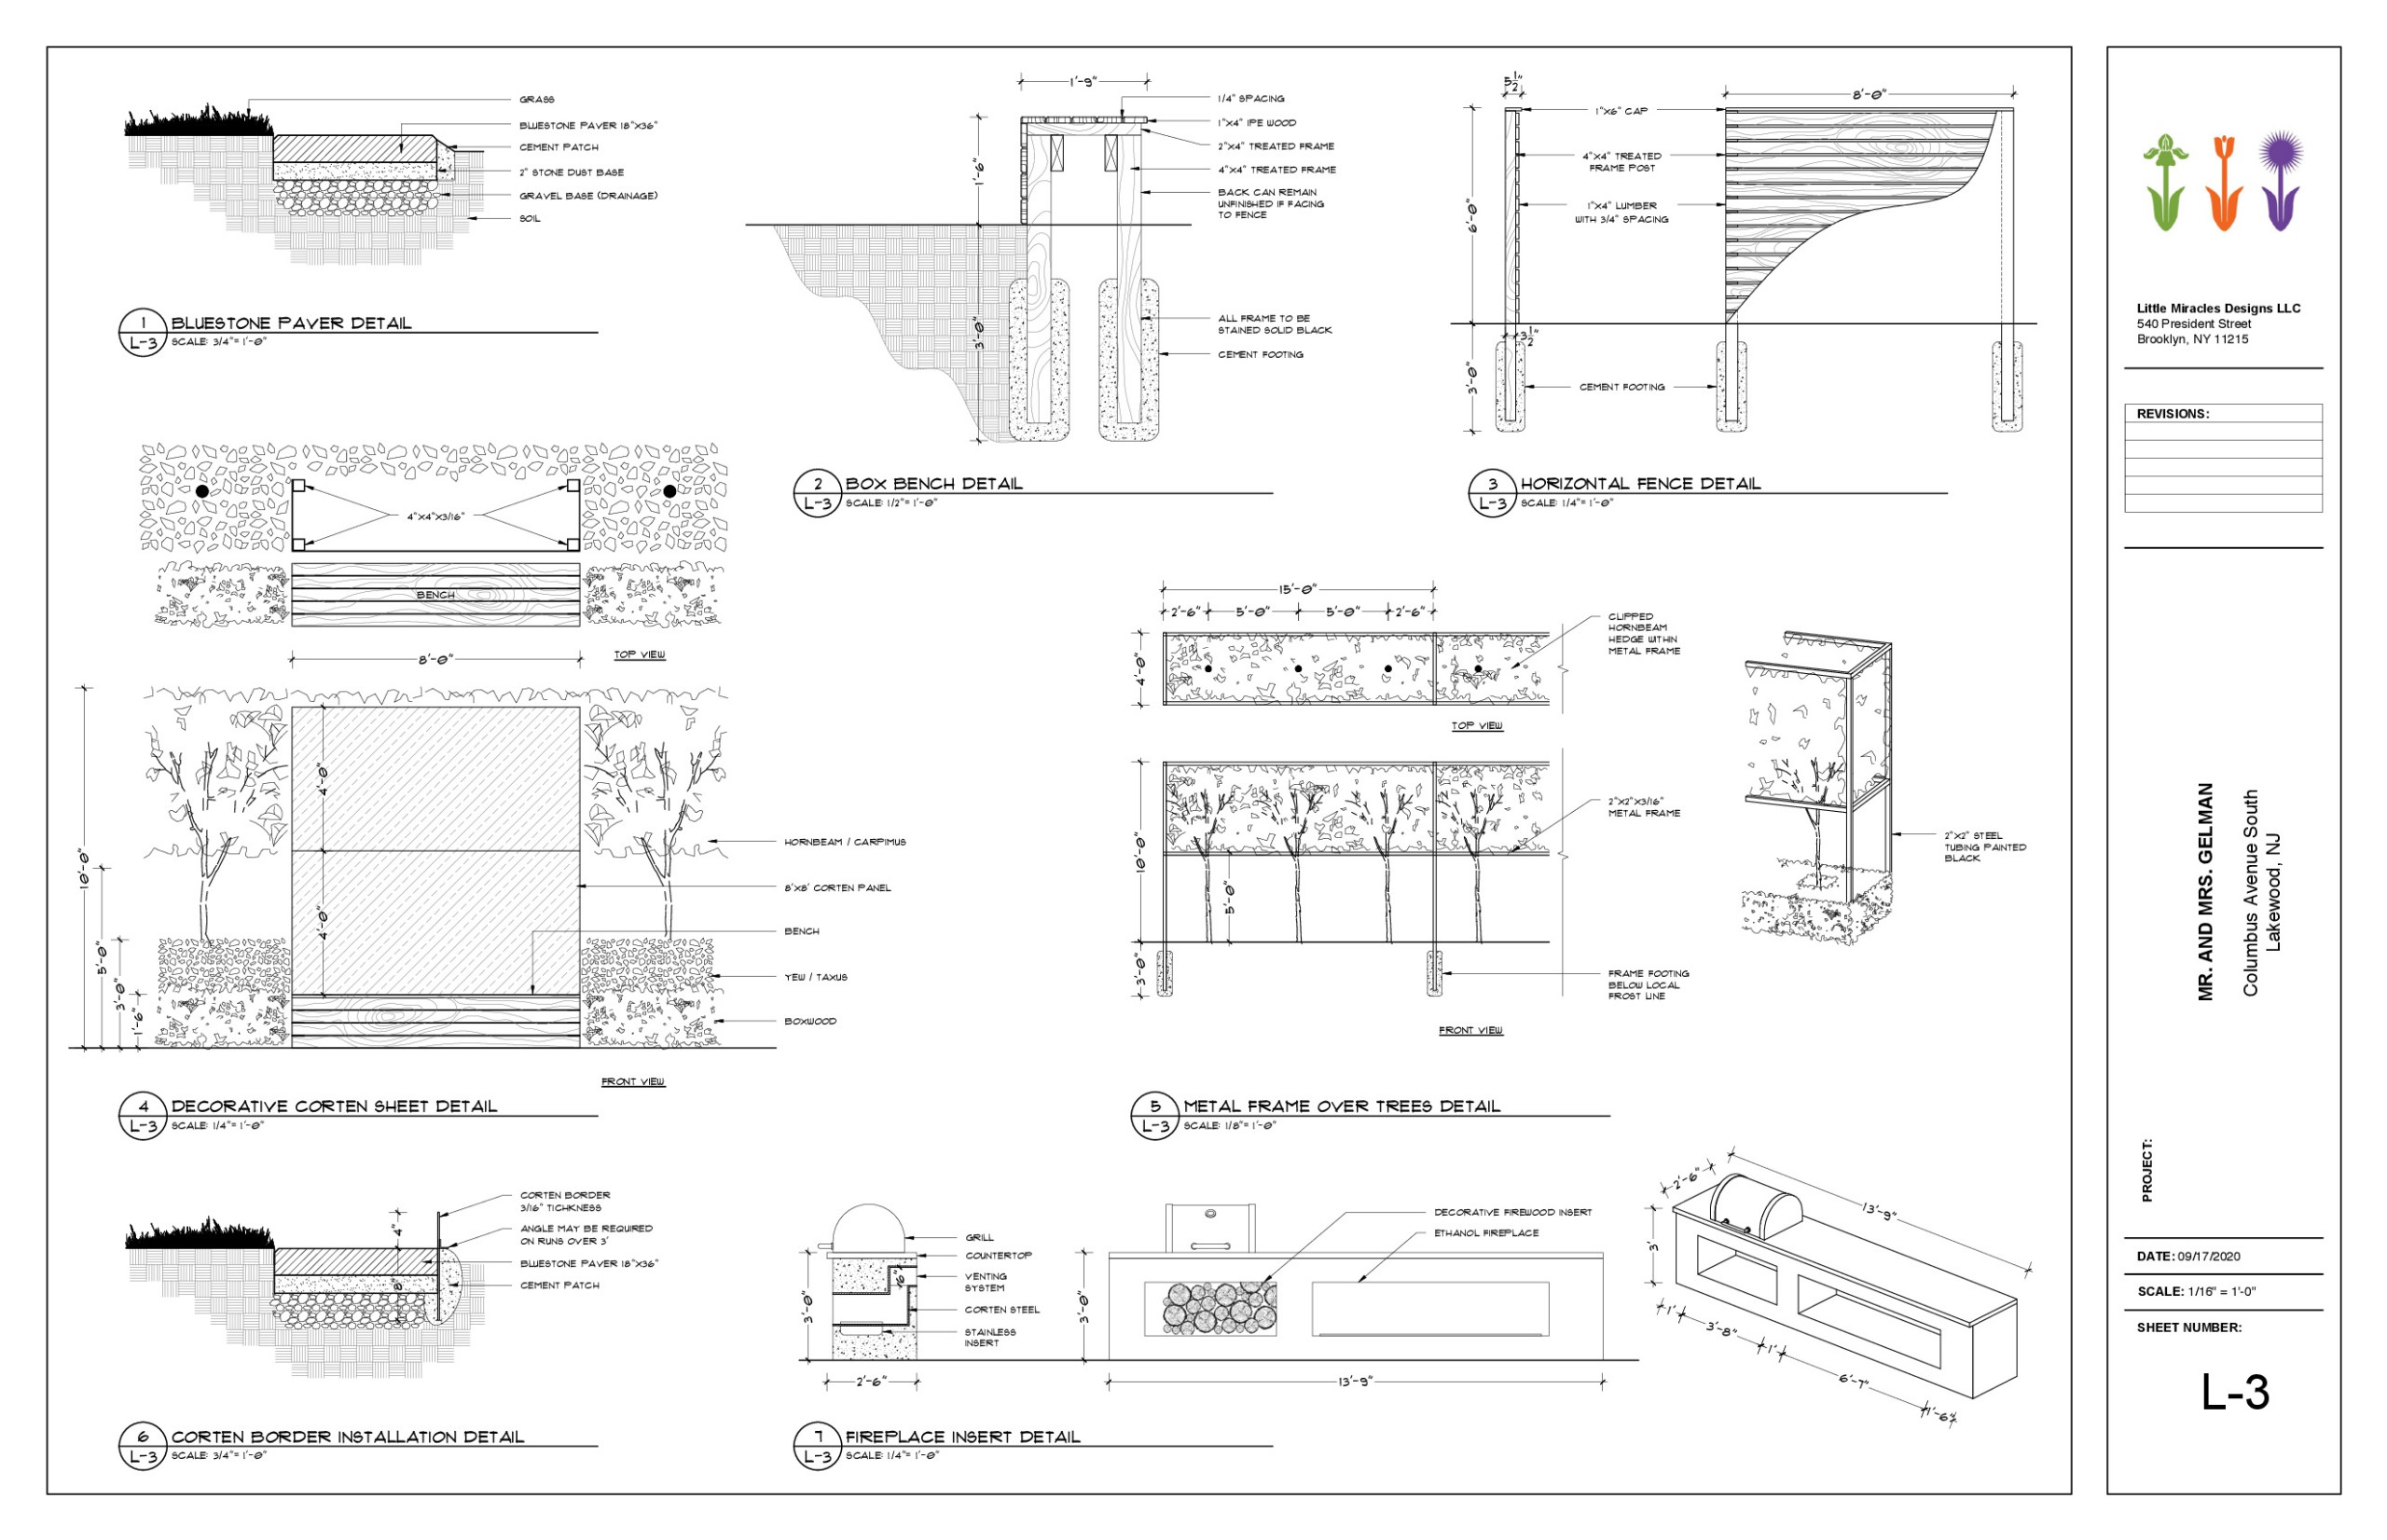 CAD Drawings presentation with details and 3D renderings